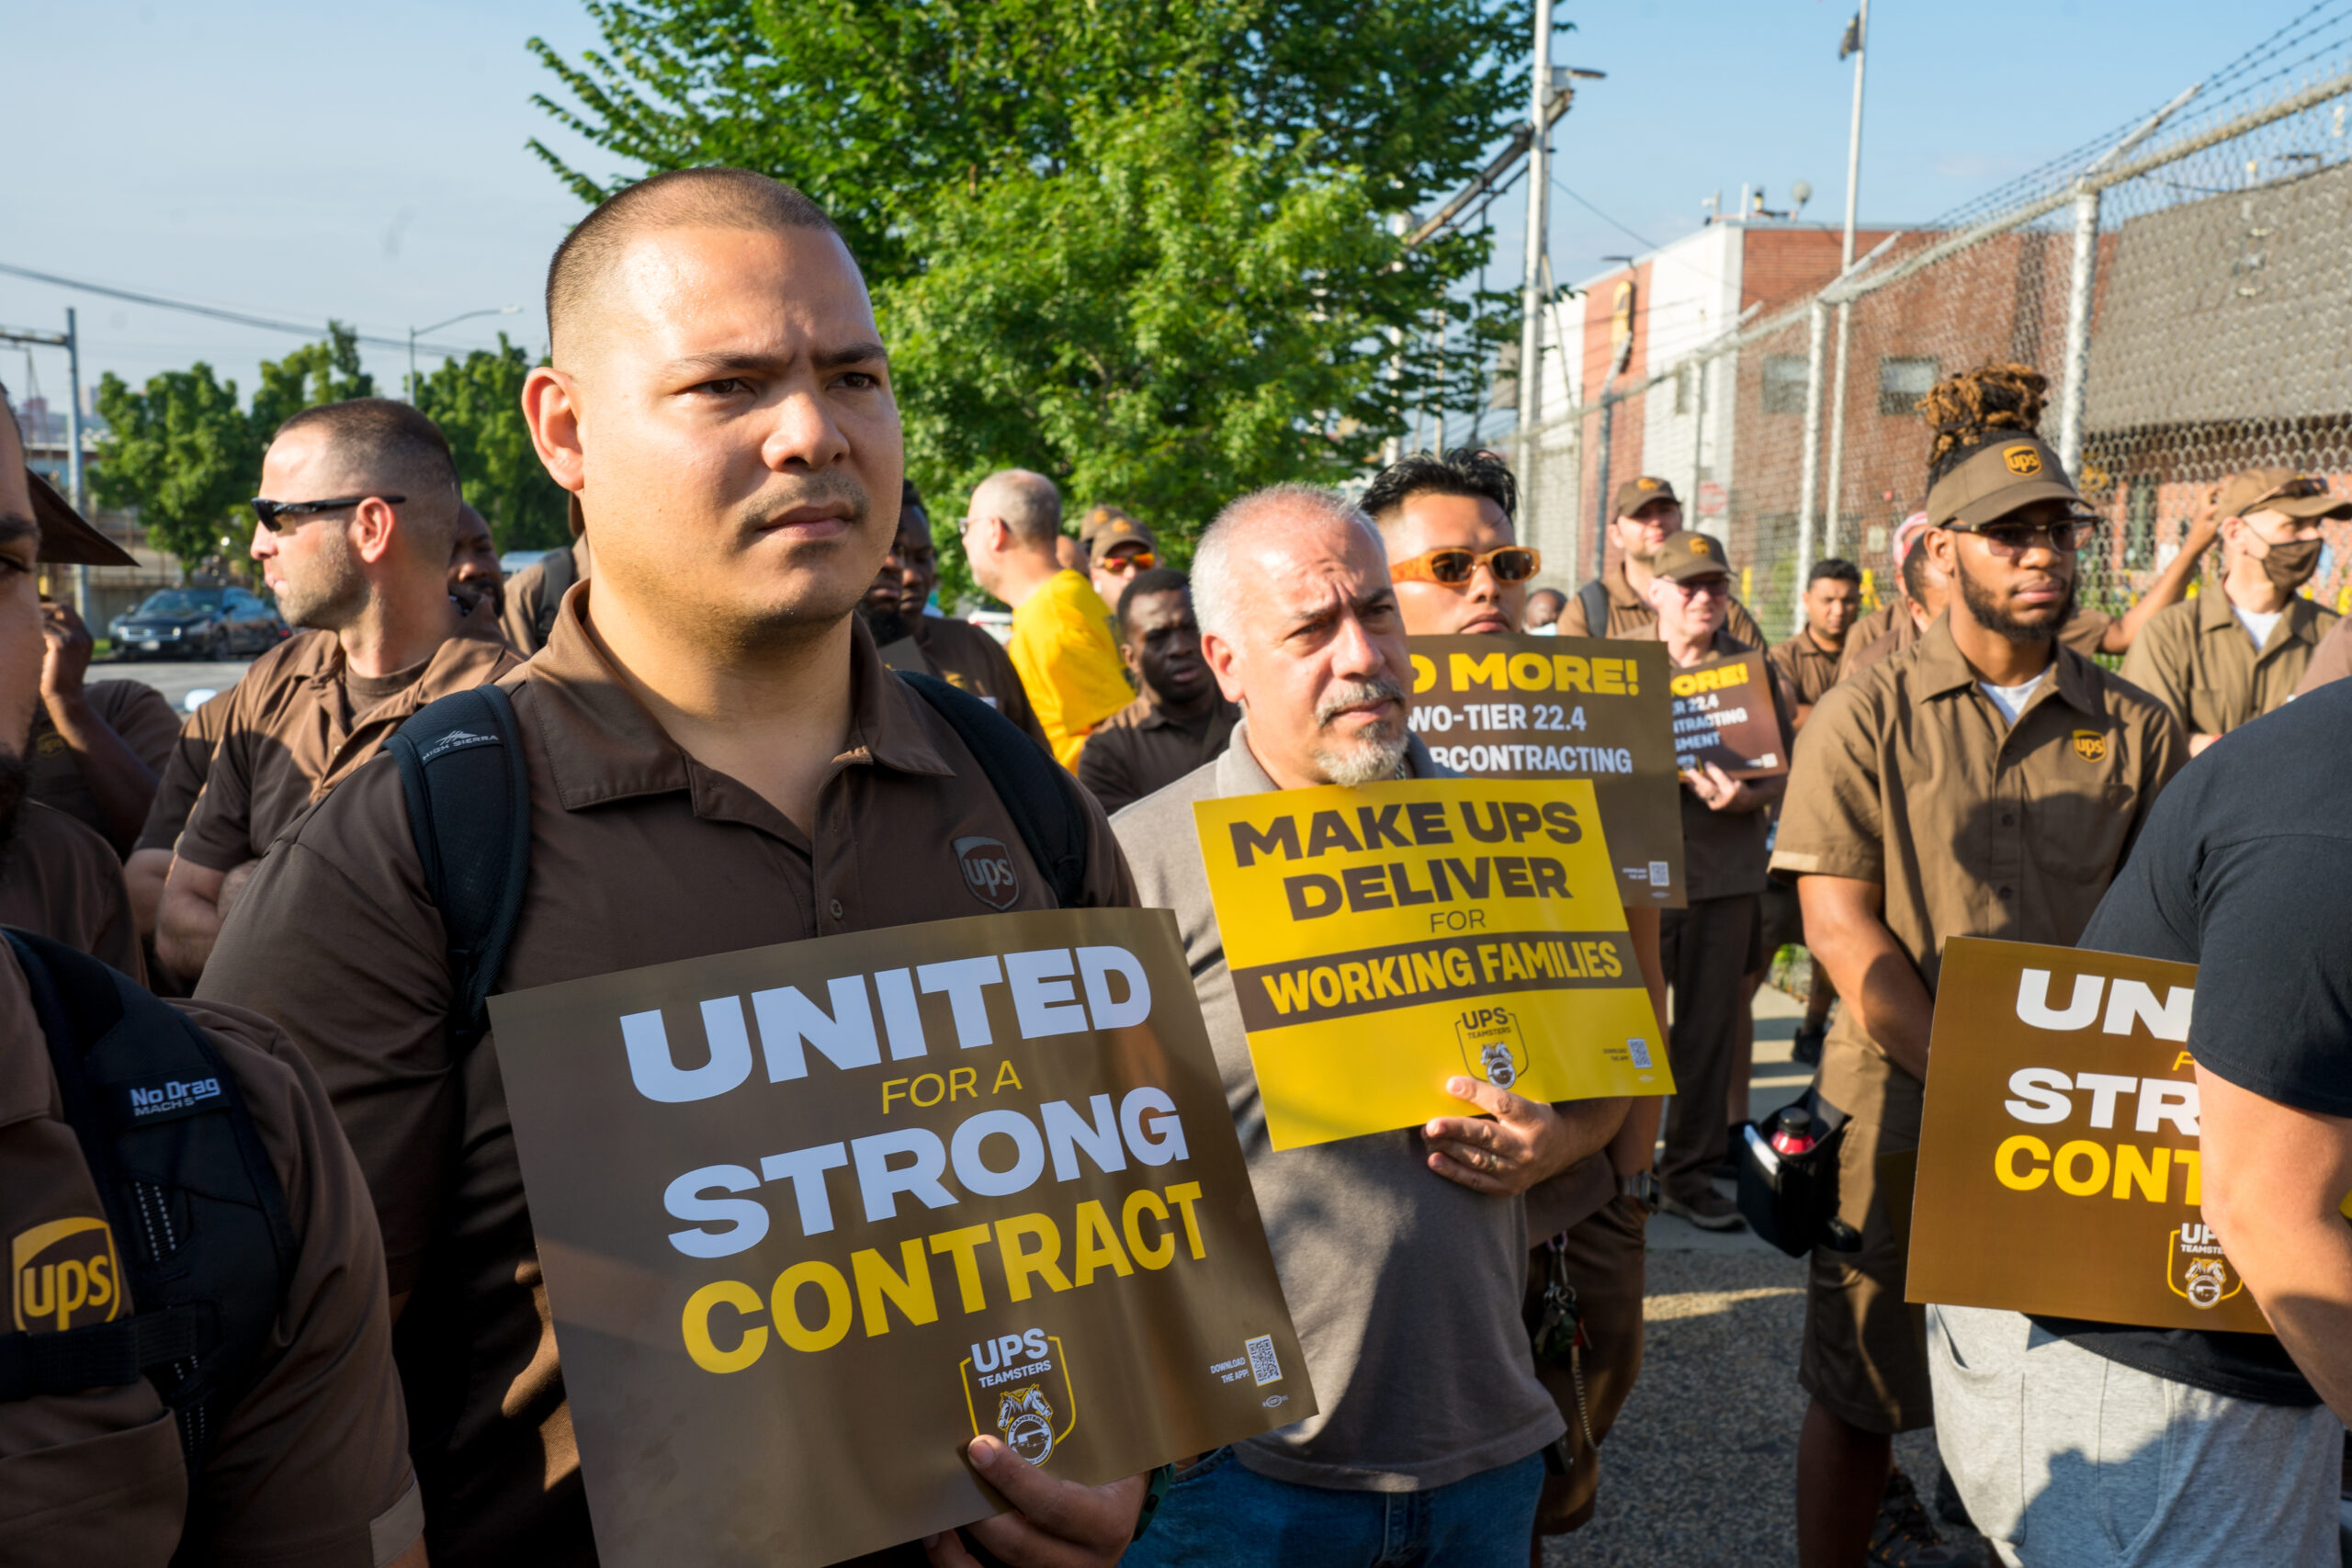 UPS Teamsters Rally in NYC to Kick Off Contract Fight – LaborPress